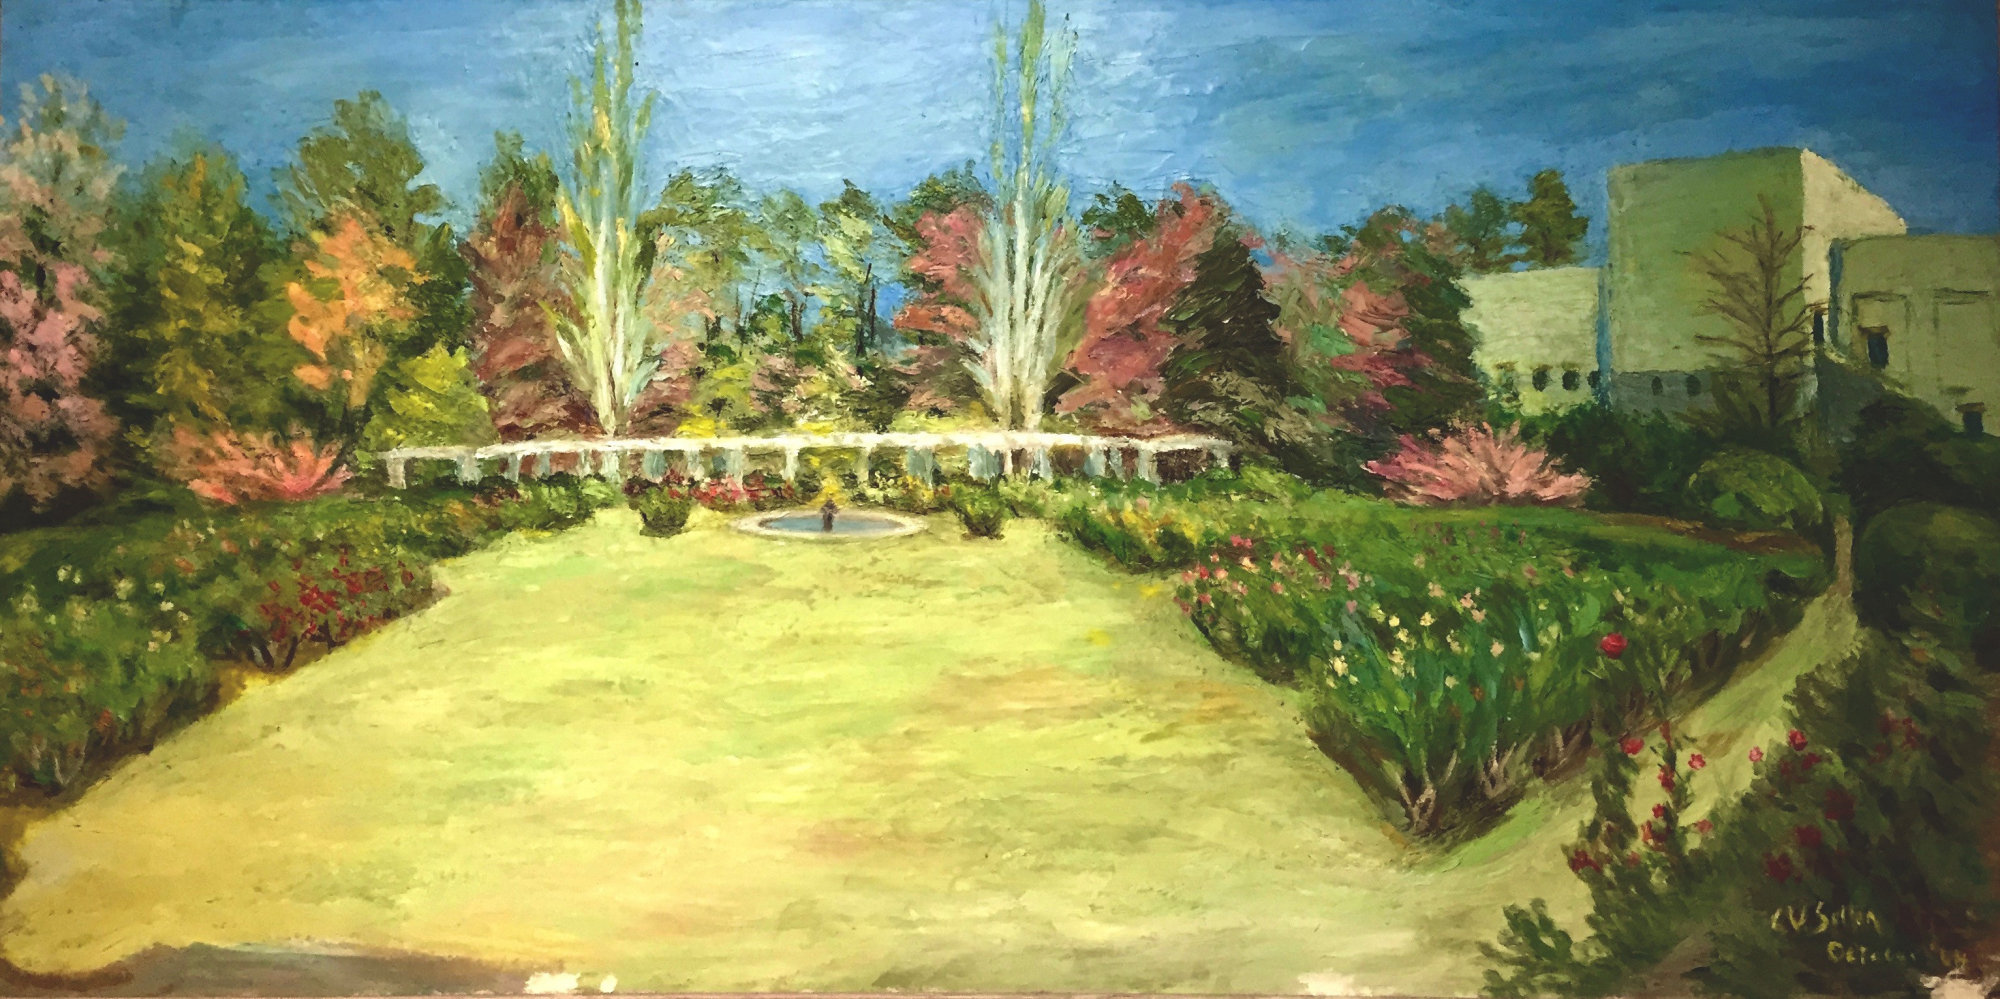 Painting of The Raleigh Rose Garden by Cantey Venable Sutton